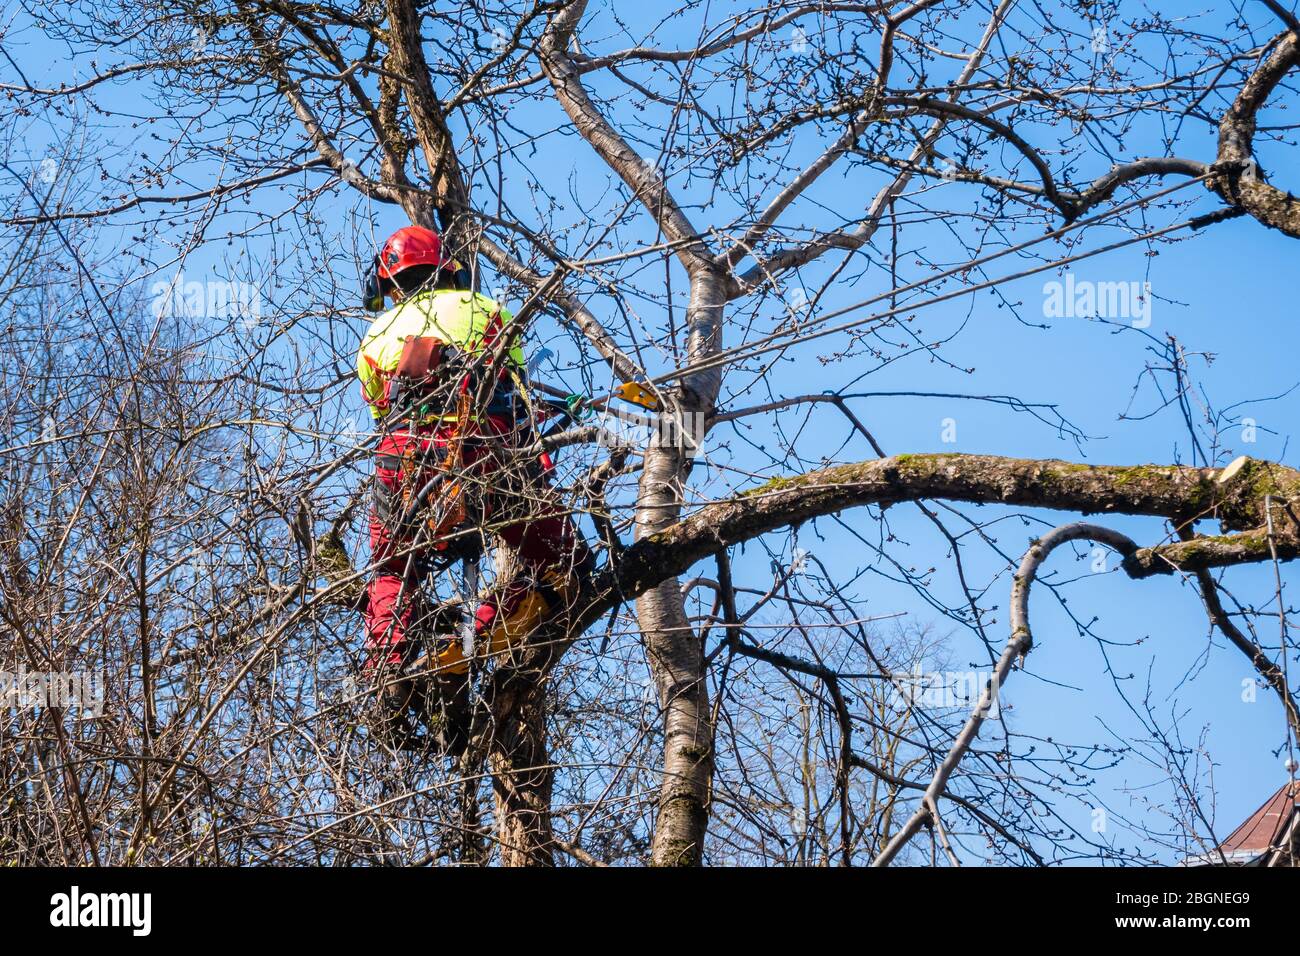 Man pruning tree tops using a saw. Lumberjack wearing protection gear and sawing branches after storm in the city. High risk job Stock Photo